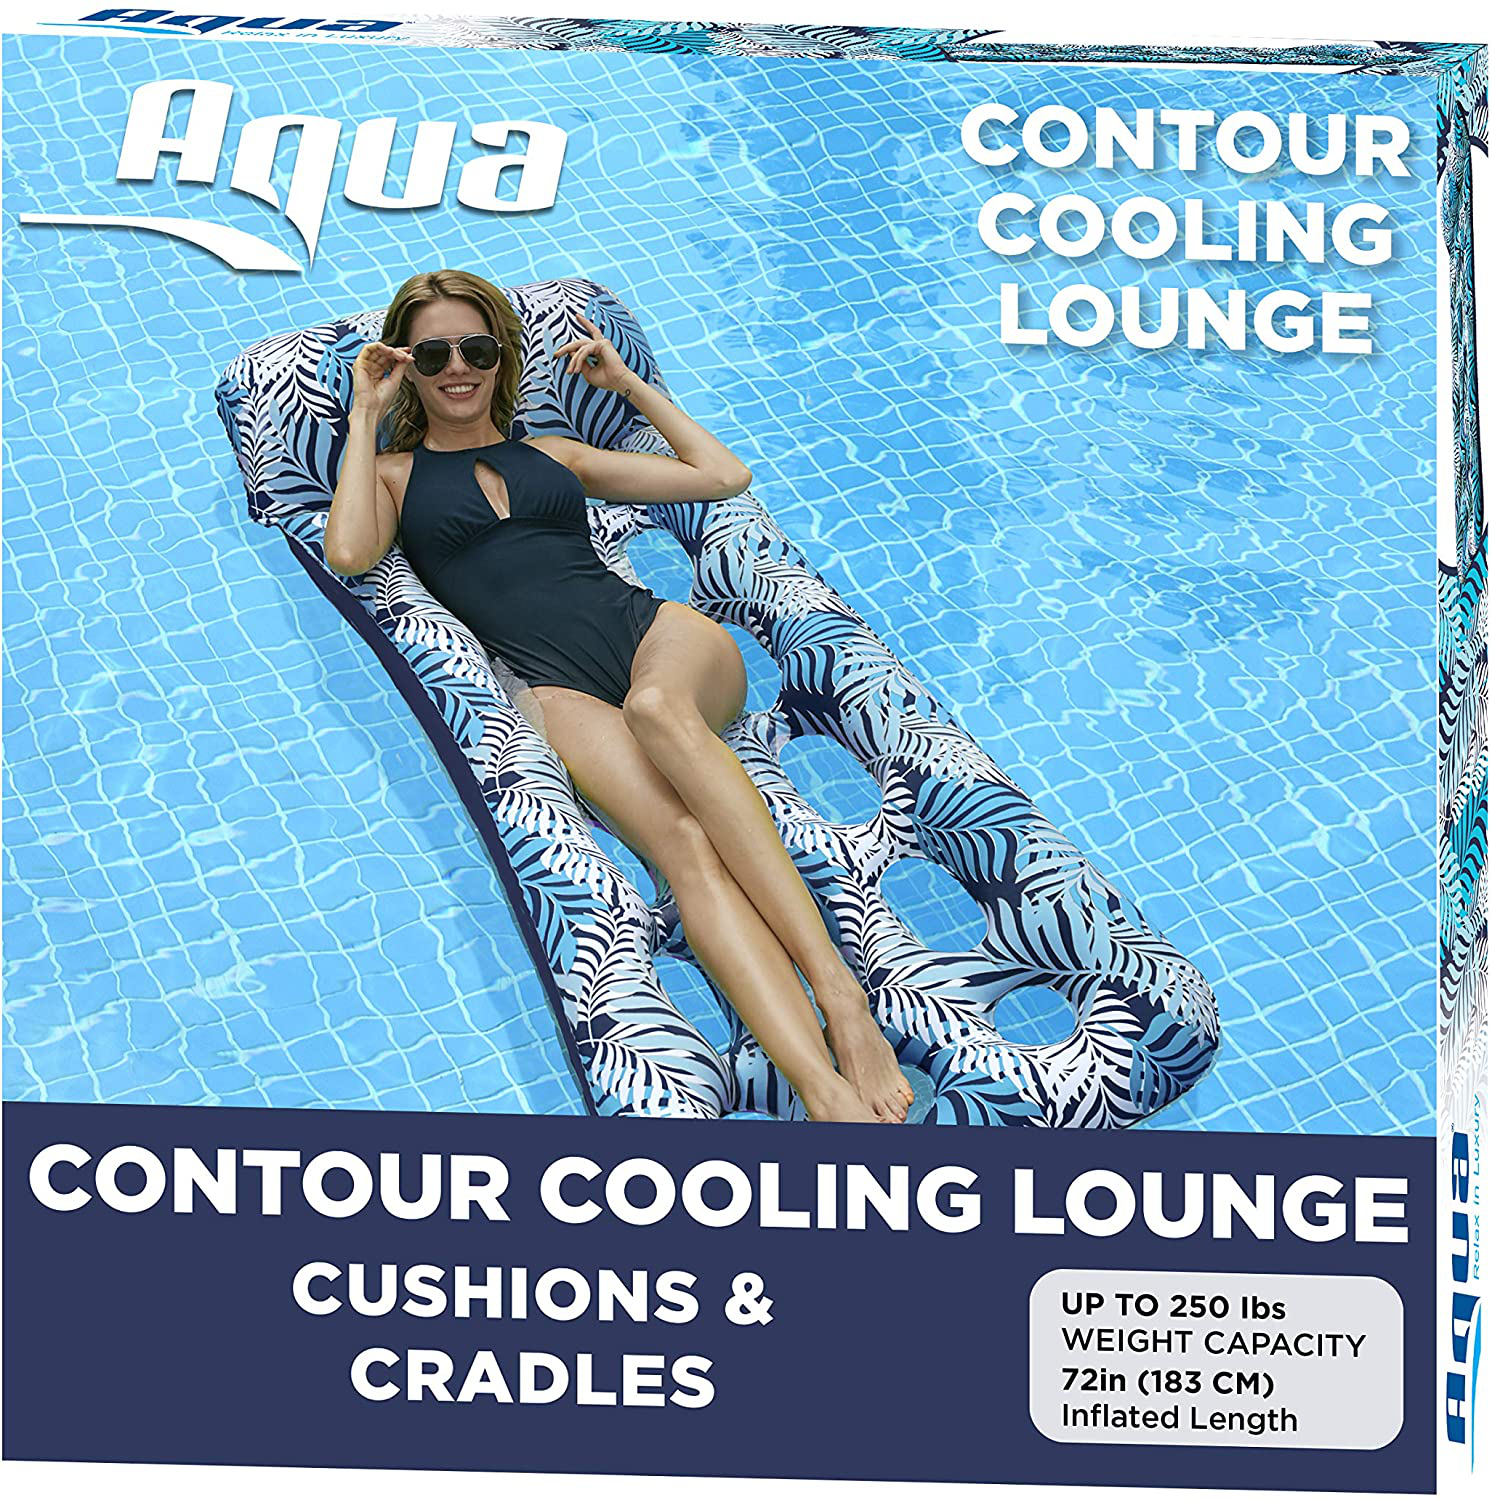 Aqua LEISURE Deluxe Pool Noodle Chair, Inflatable Pool Noodle Float, Luxury Fabric, Heavy Duty, Blue Pineapple Hibiscus, AZL20347